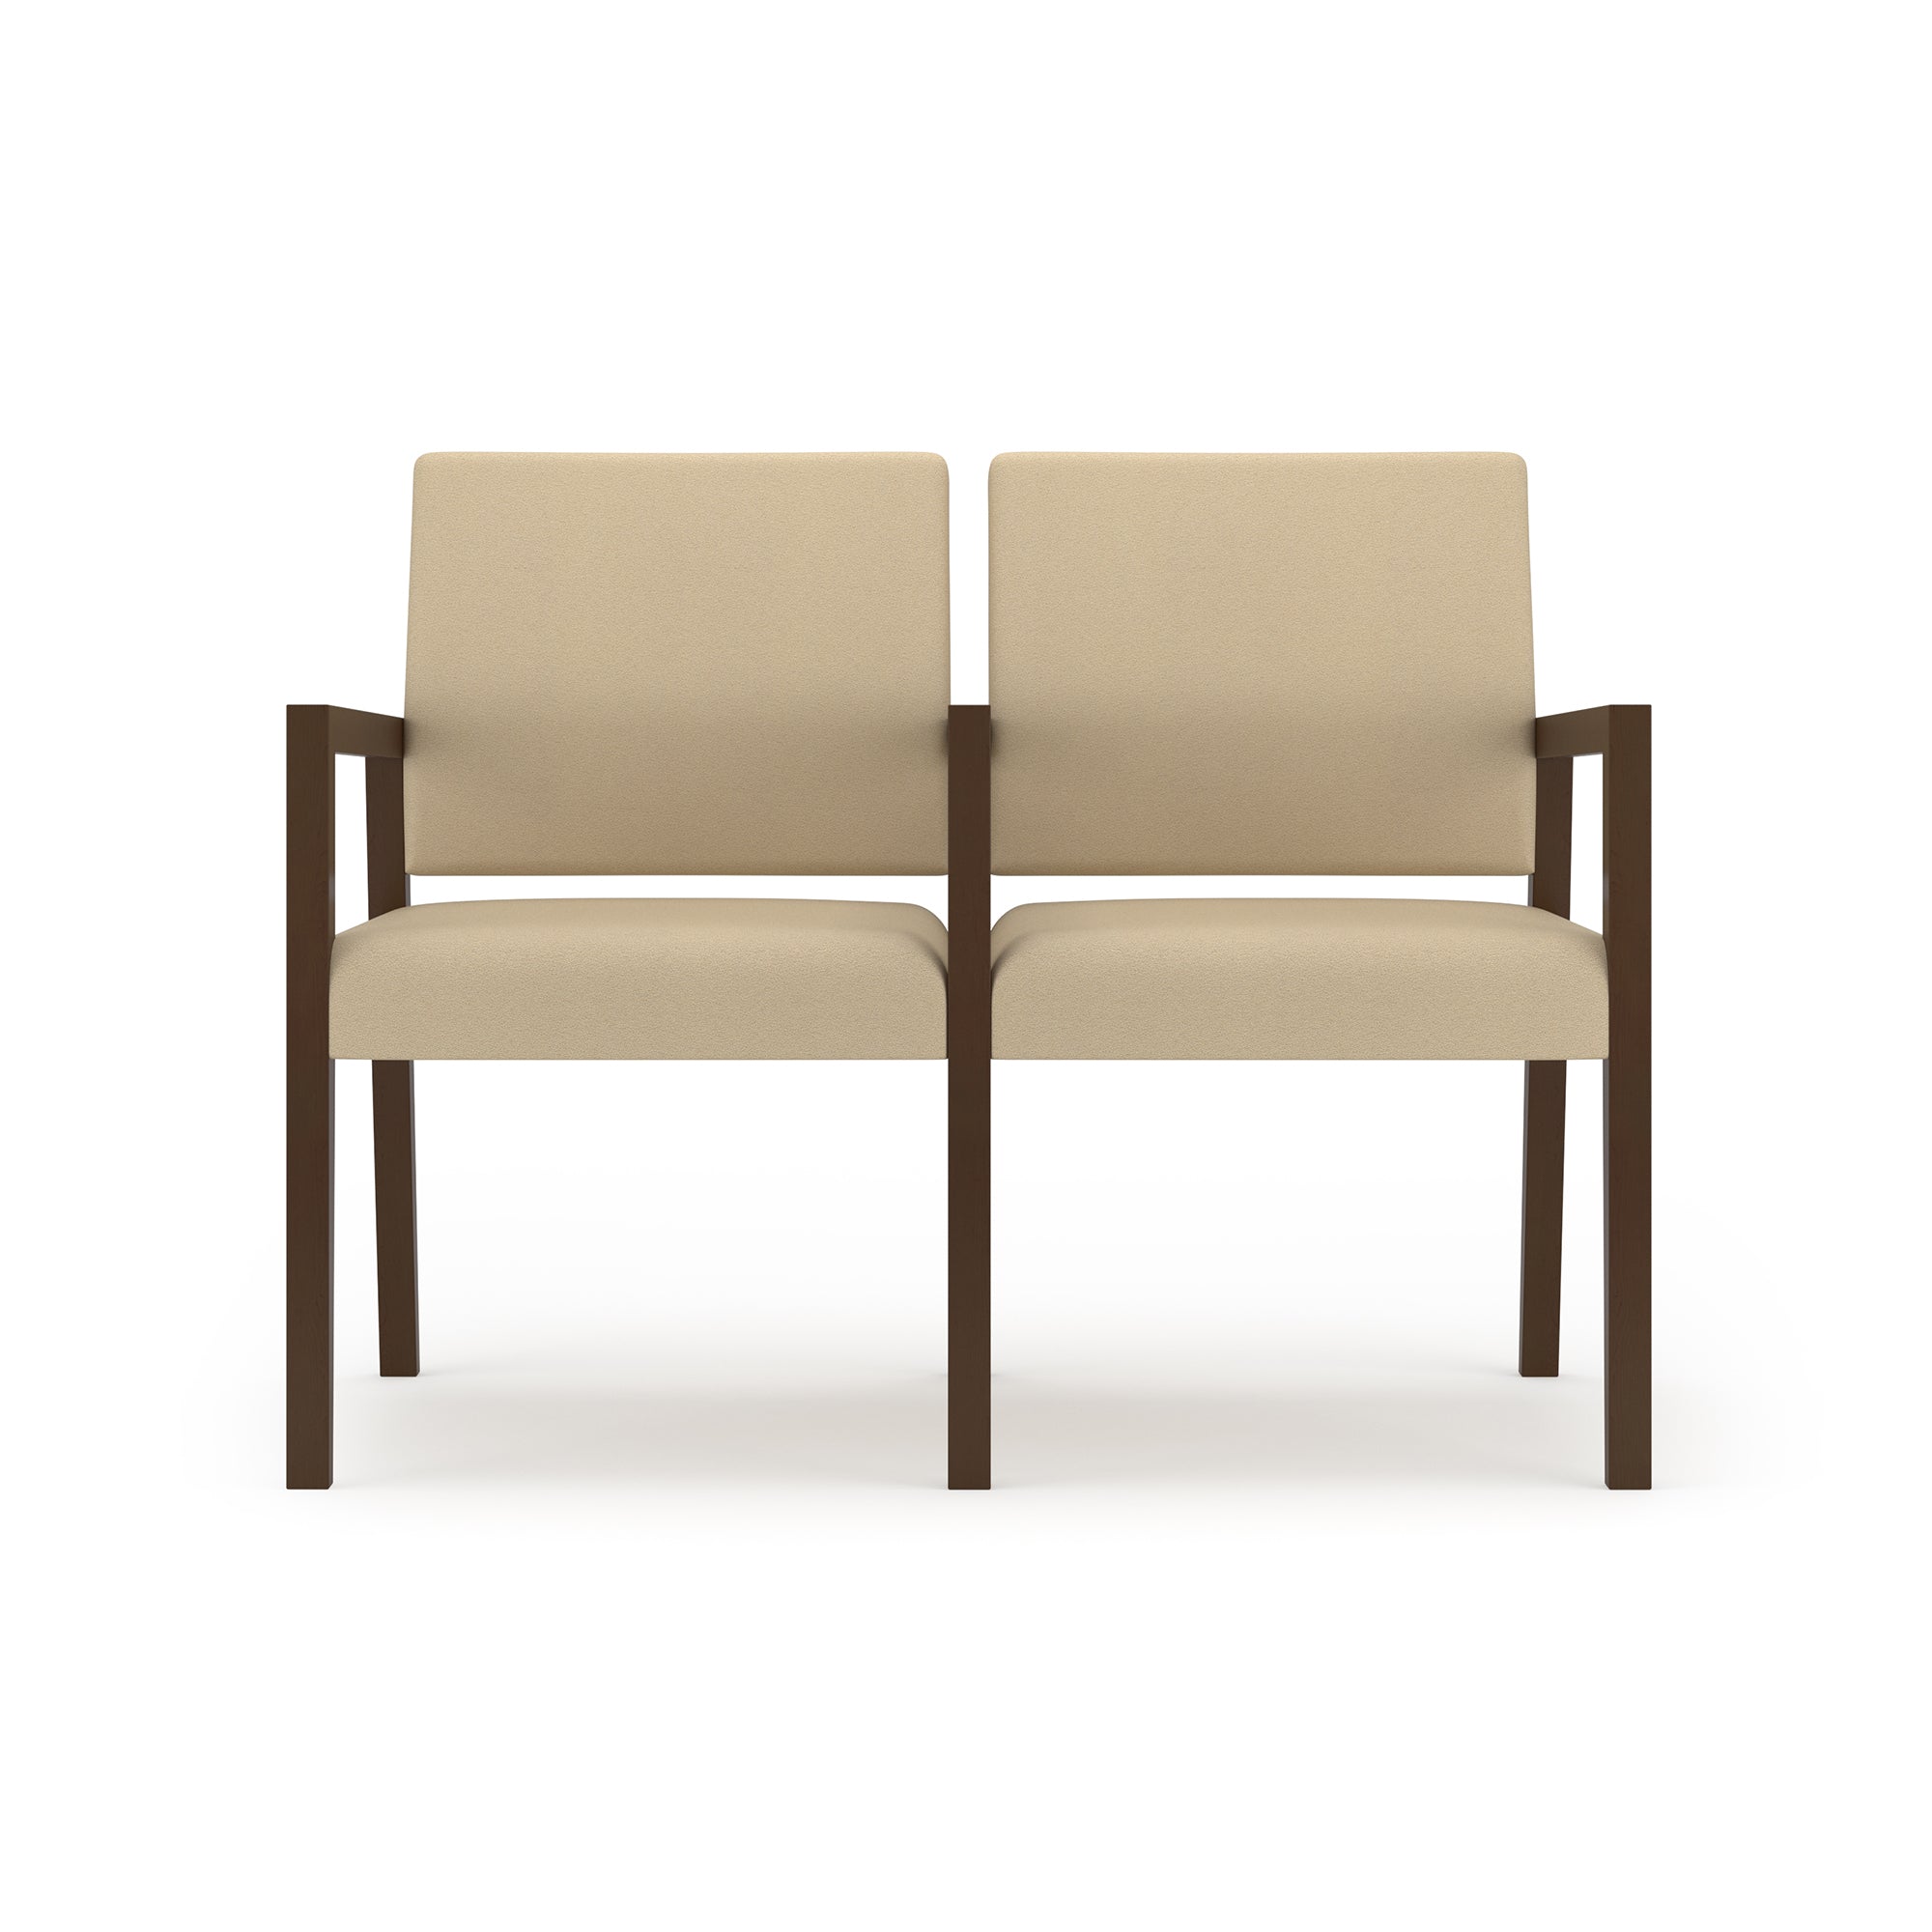 BK2101 - Brooklyn Series 2 Seater Reception Chairs by Lesro